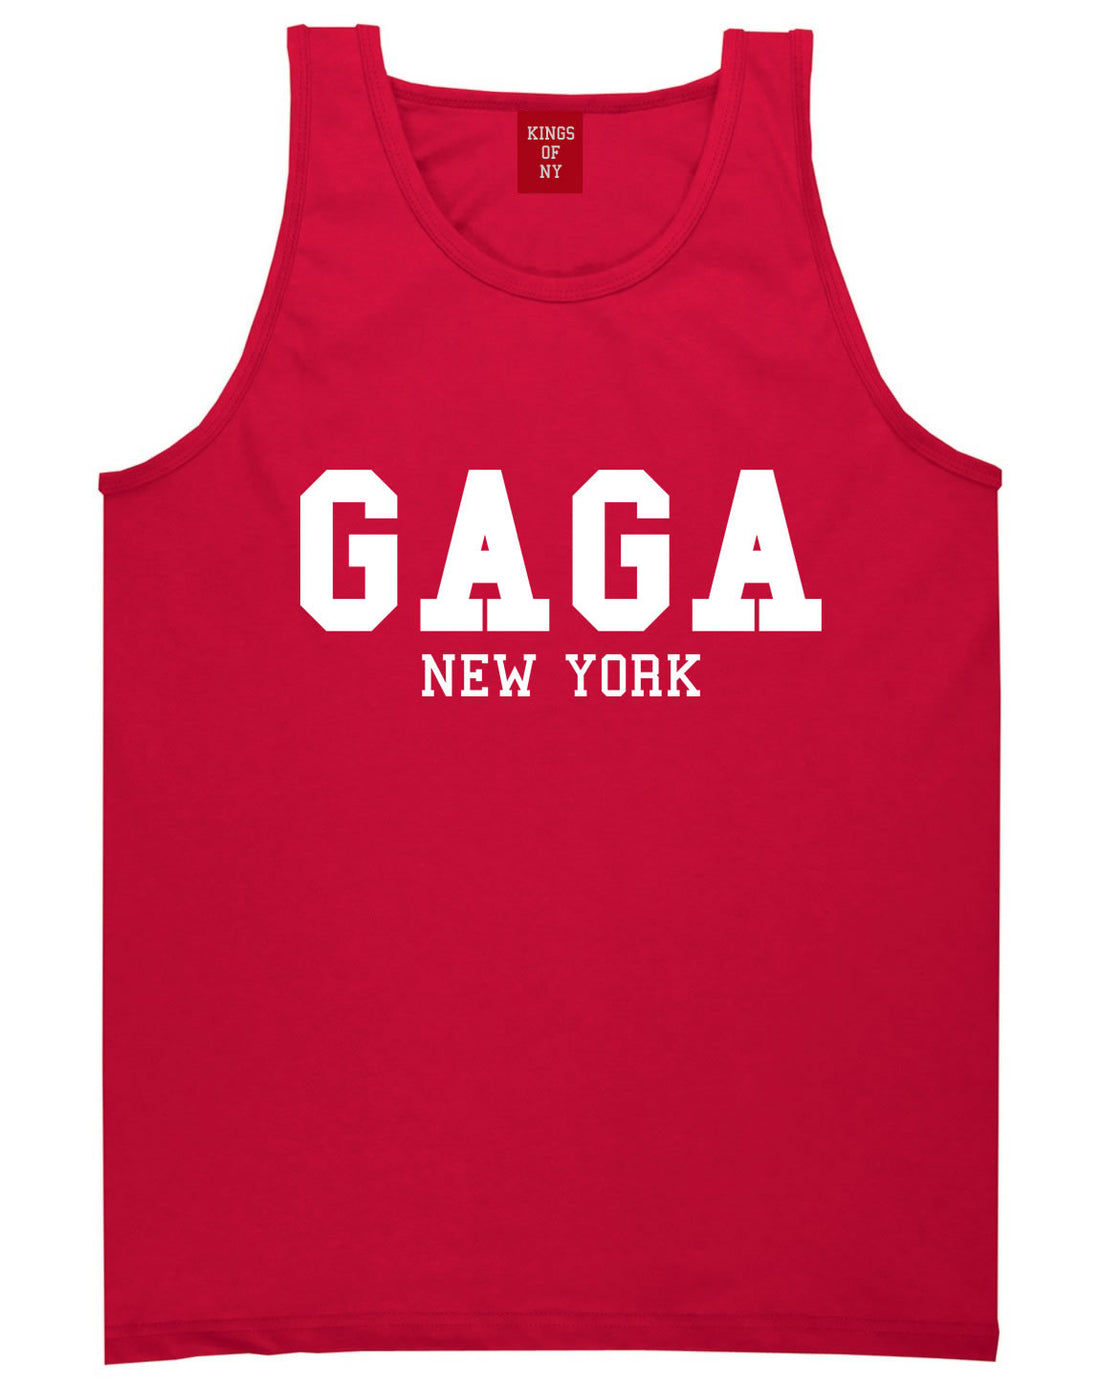 Gaga New York Tank Top in Red by Kings Of NY